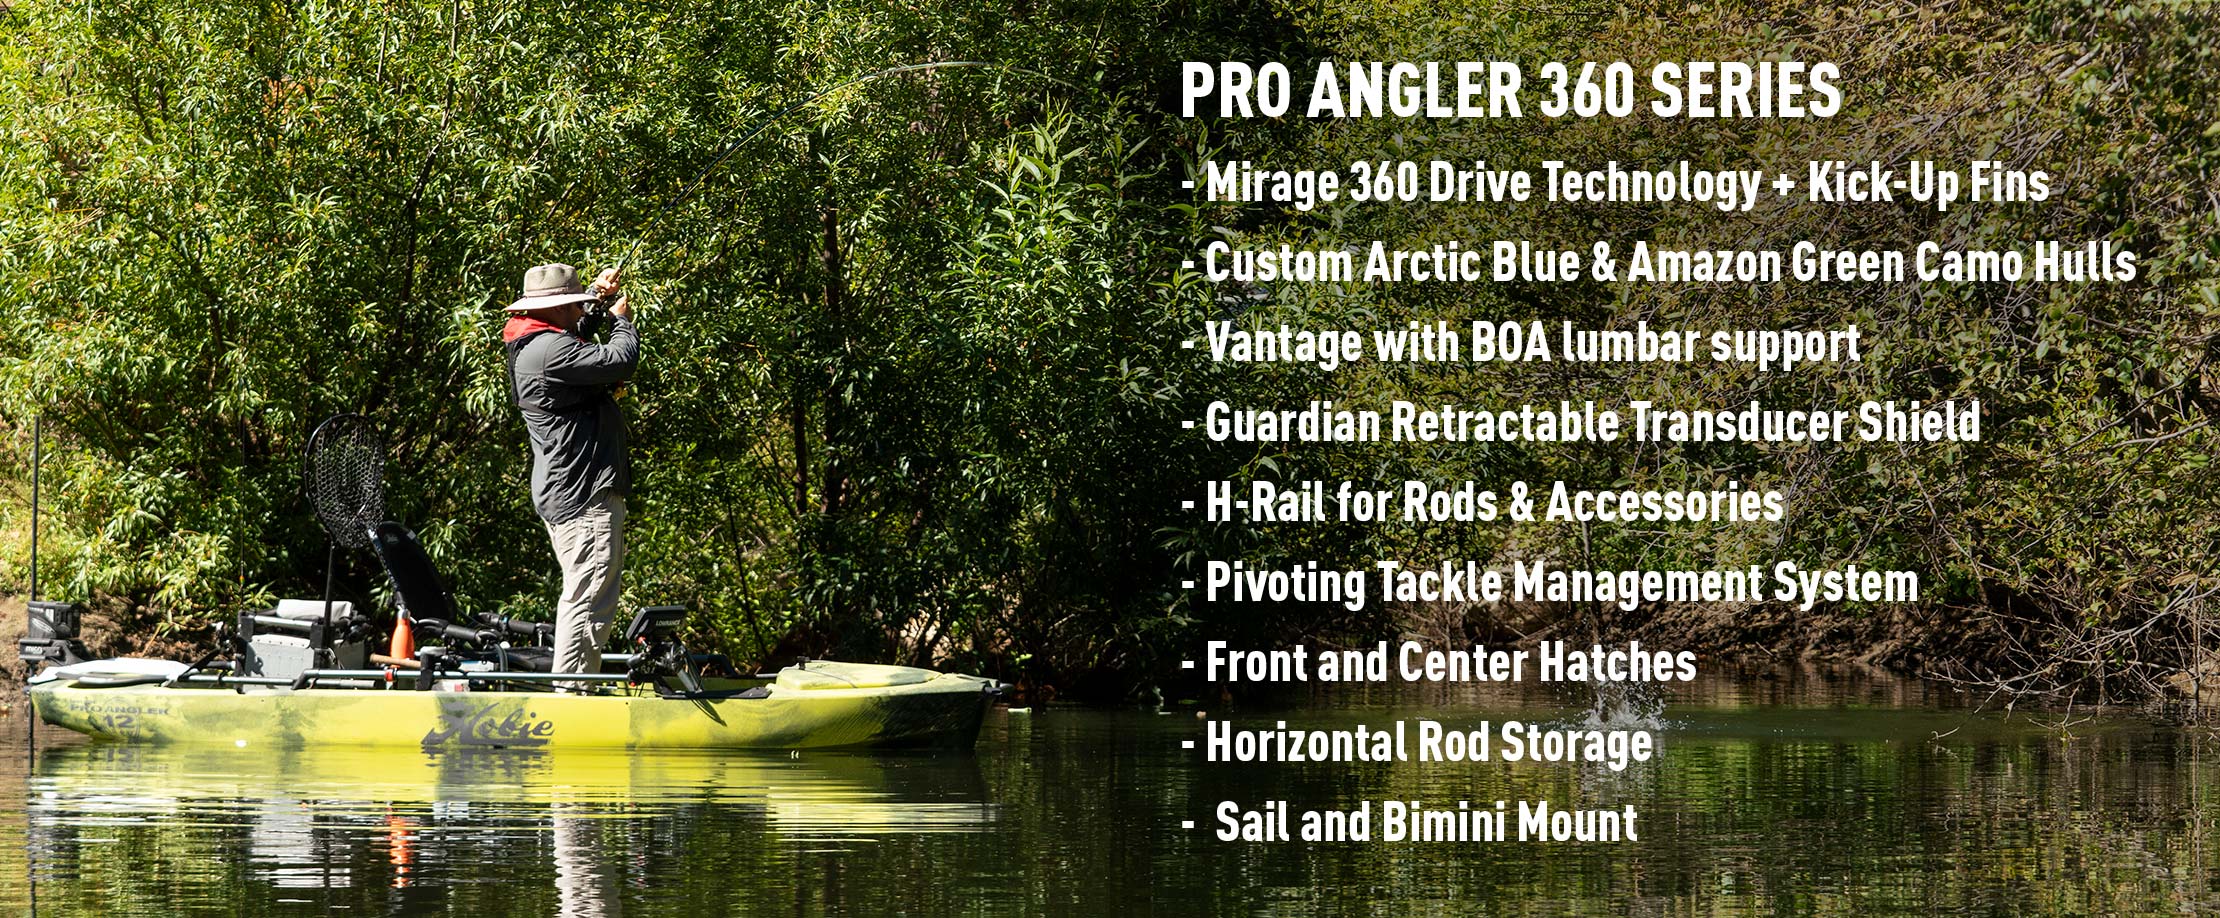 Mirage Pro Angler 14 with 360 Drive Technology Features